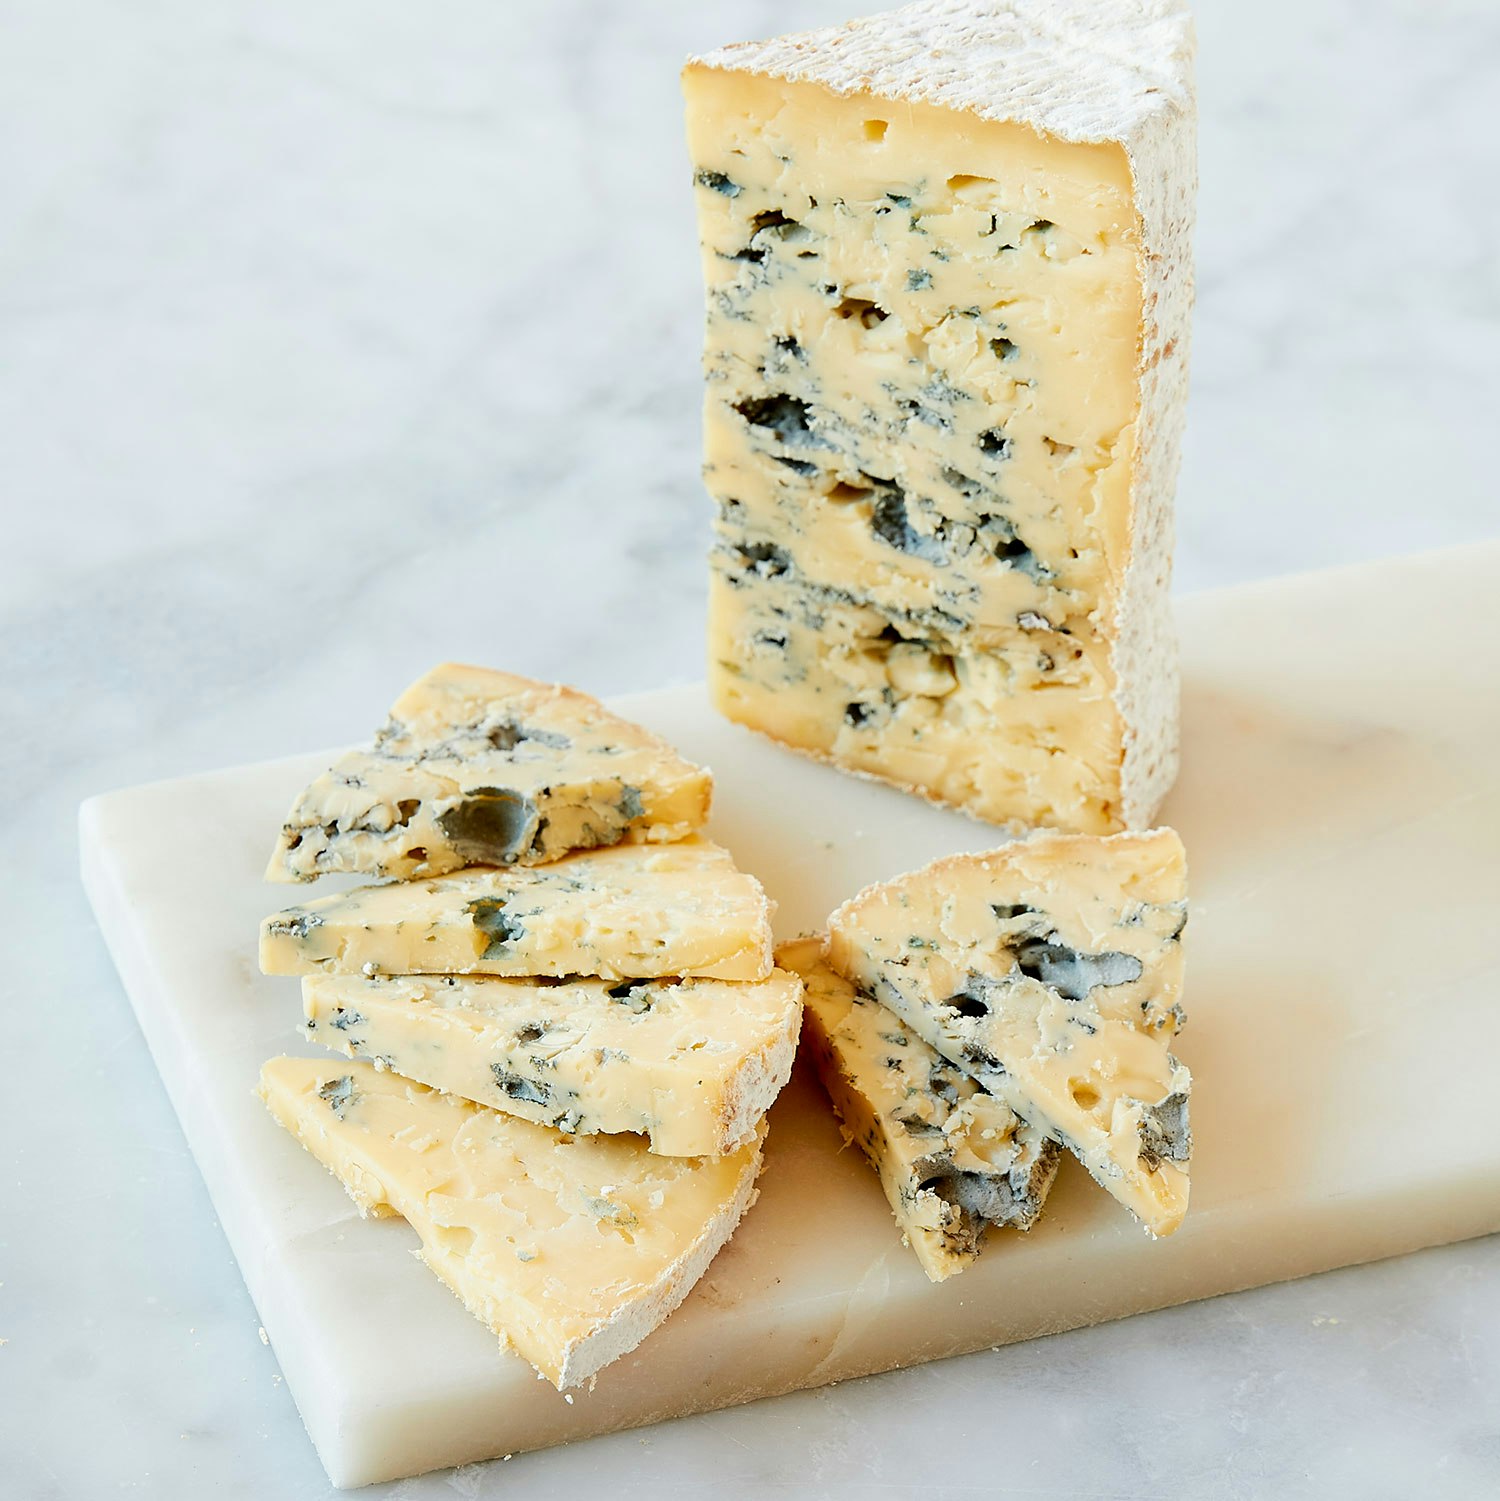 vonTrapp-Farmstead-Mad-River-Blue-cheese-112653-01